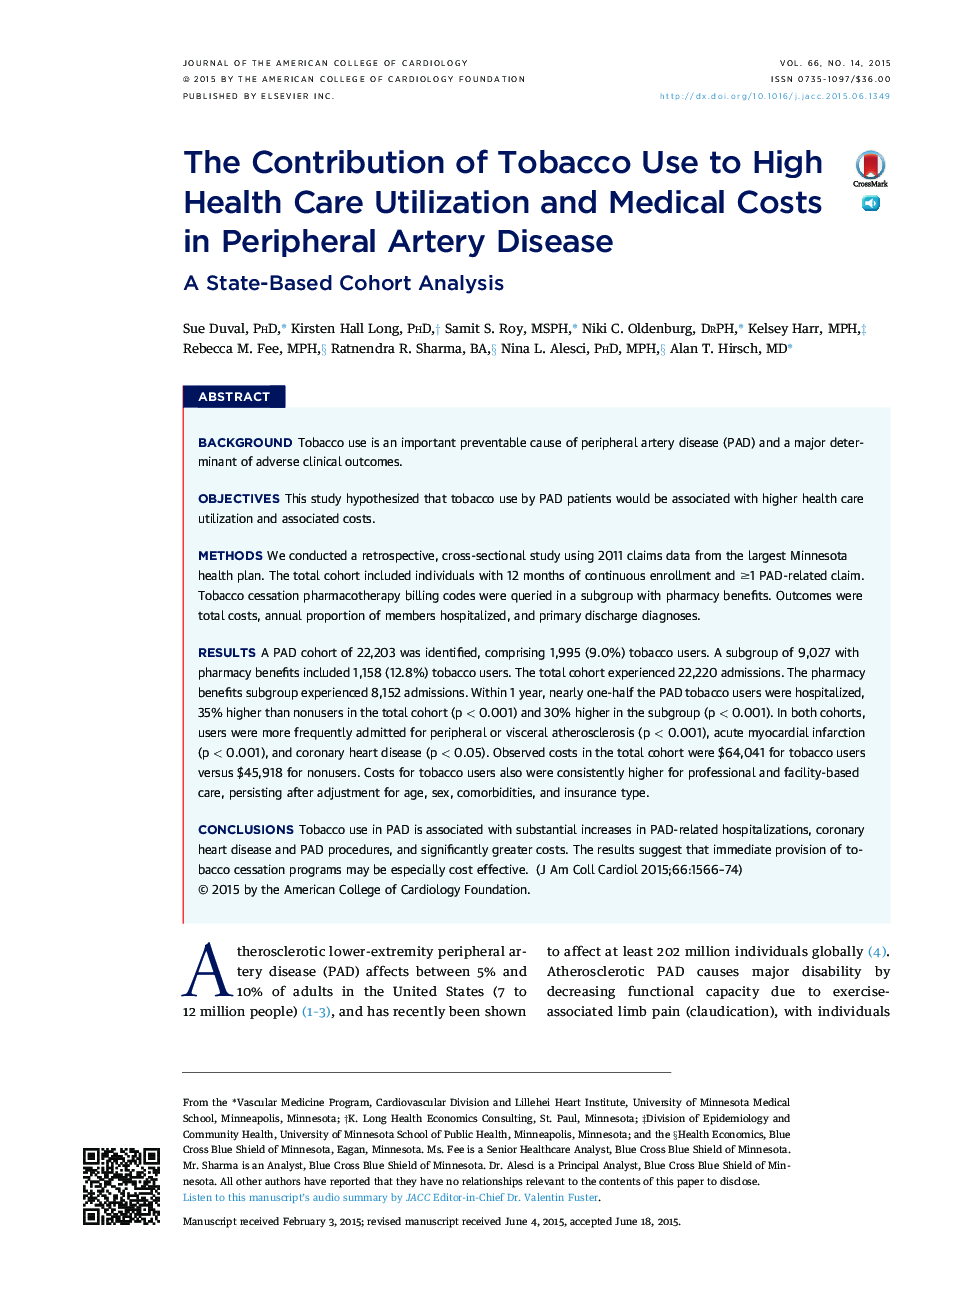 The Contribution of Tobacco Use to High Health Care Utilization and Medical Costs in Peripheral Artery Disease: A State-Based Cohort Analysis